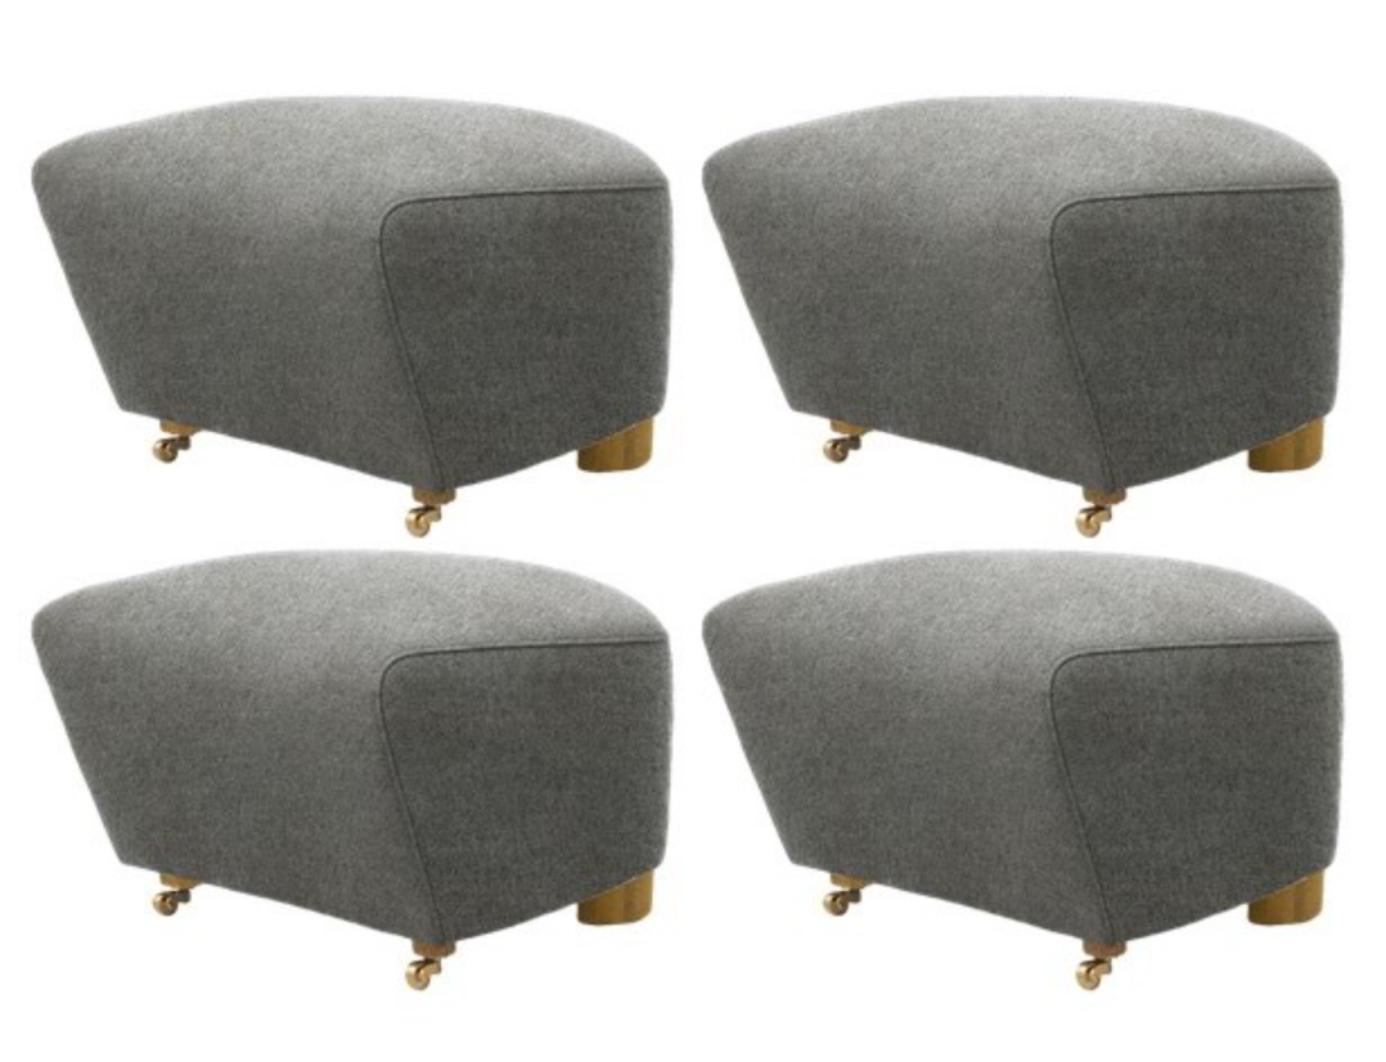 Set of 4 grey natural oak hallingdal the tired man footstools by Lassen.
Dimensions: W 55 x D 53 x H 36 cm 
Materials: Textile

Flemming Lassen designed the overstuffed easy chair, The Tired Man, for The Copenhagen Cabinetmakers’ Guild